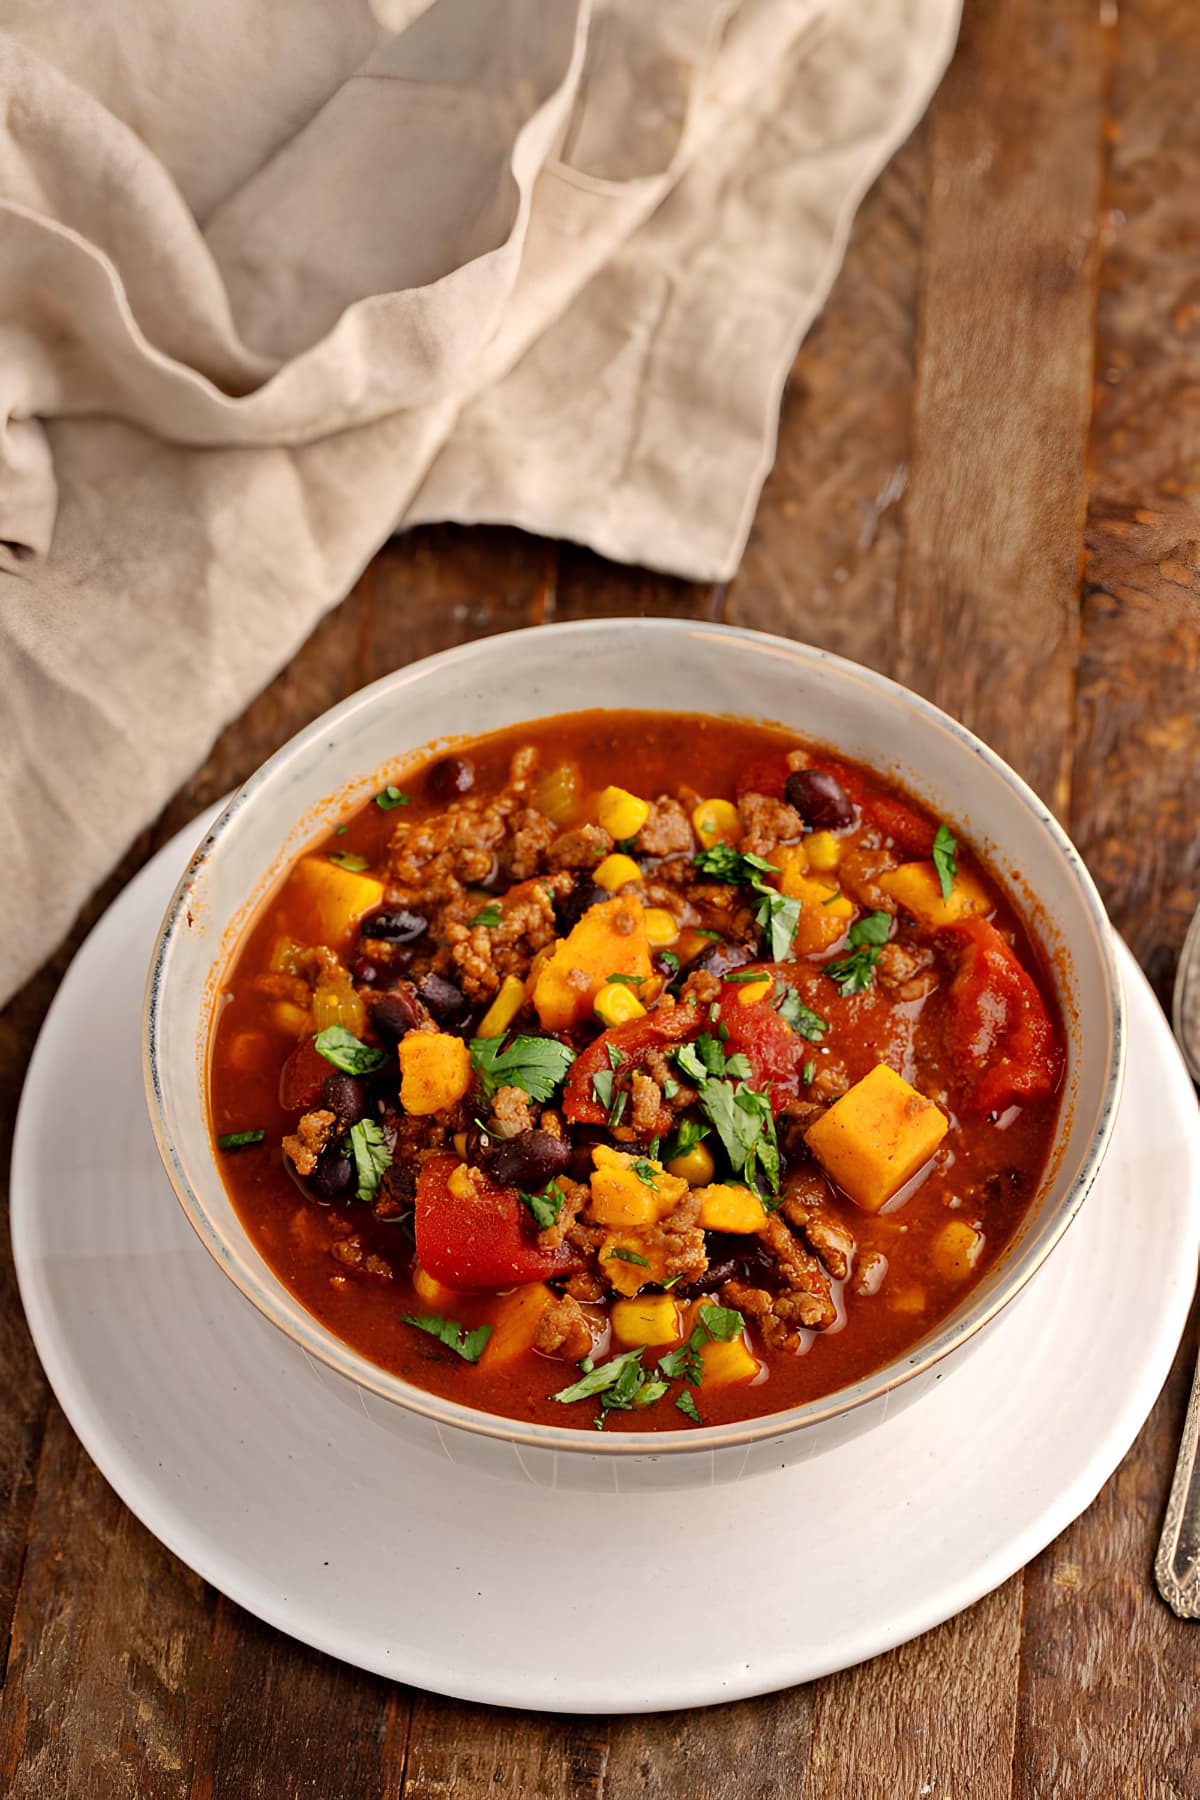 A bowl of sweet potato chili, garnished with fresh herbs, served hot and ready to be savored